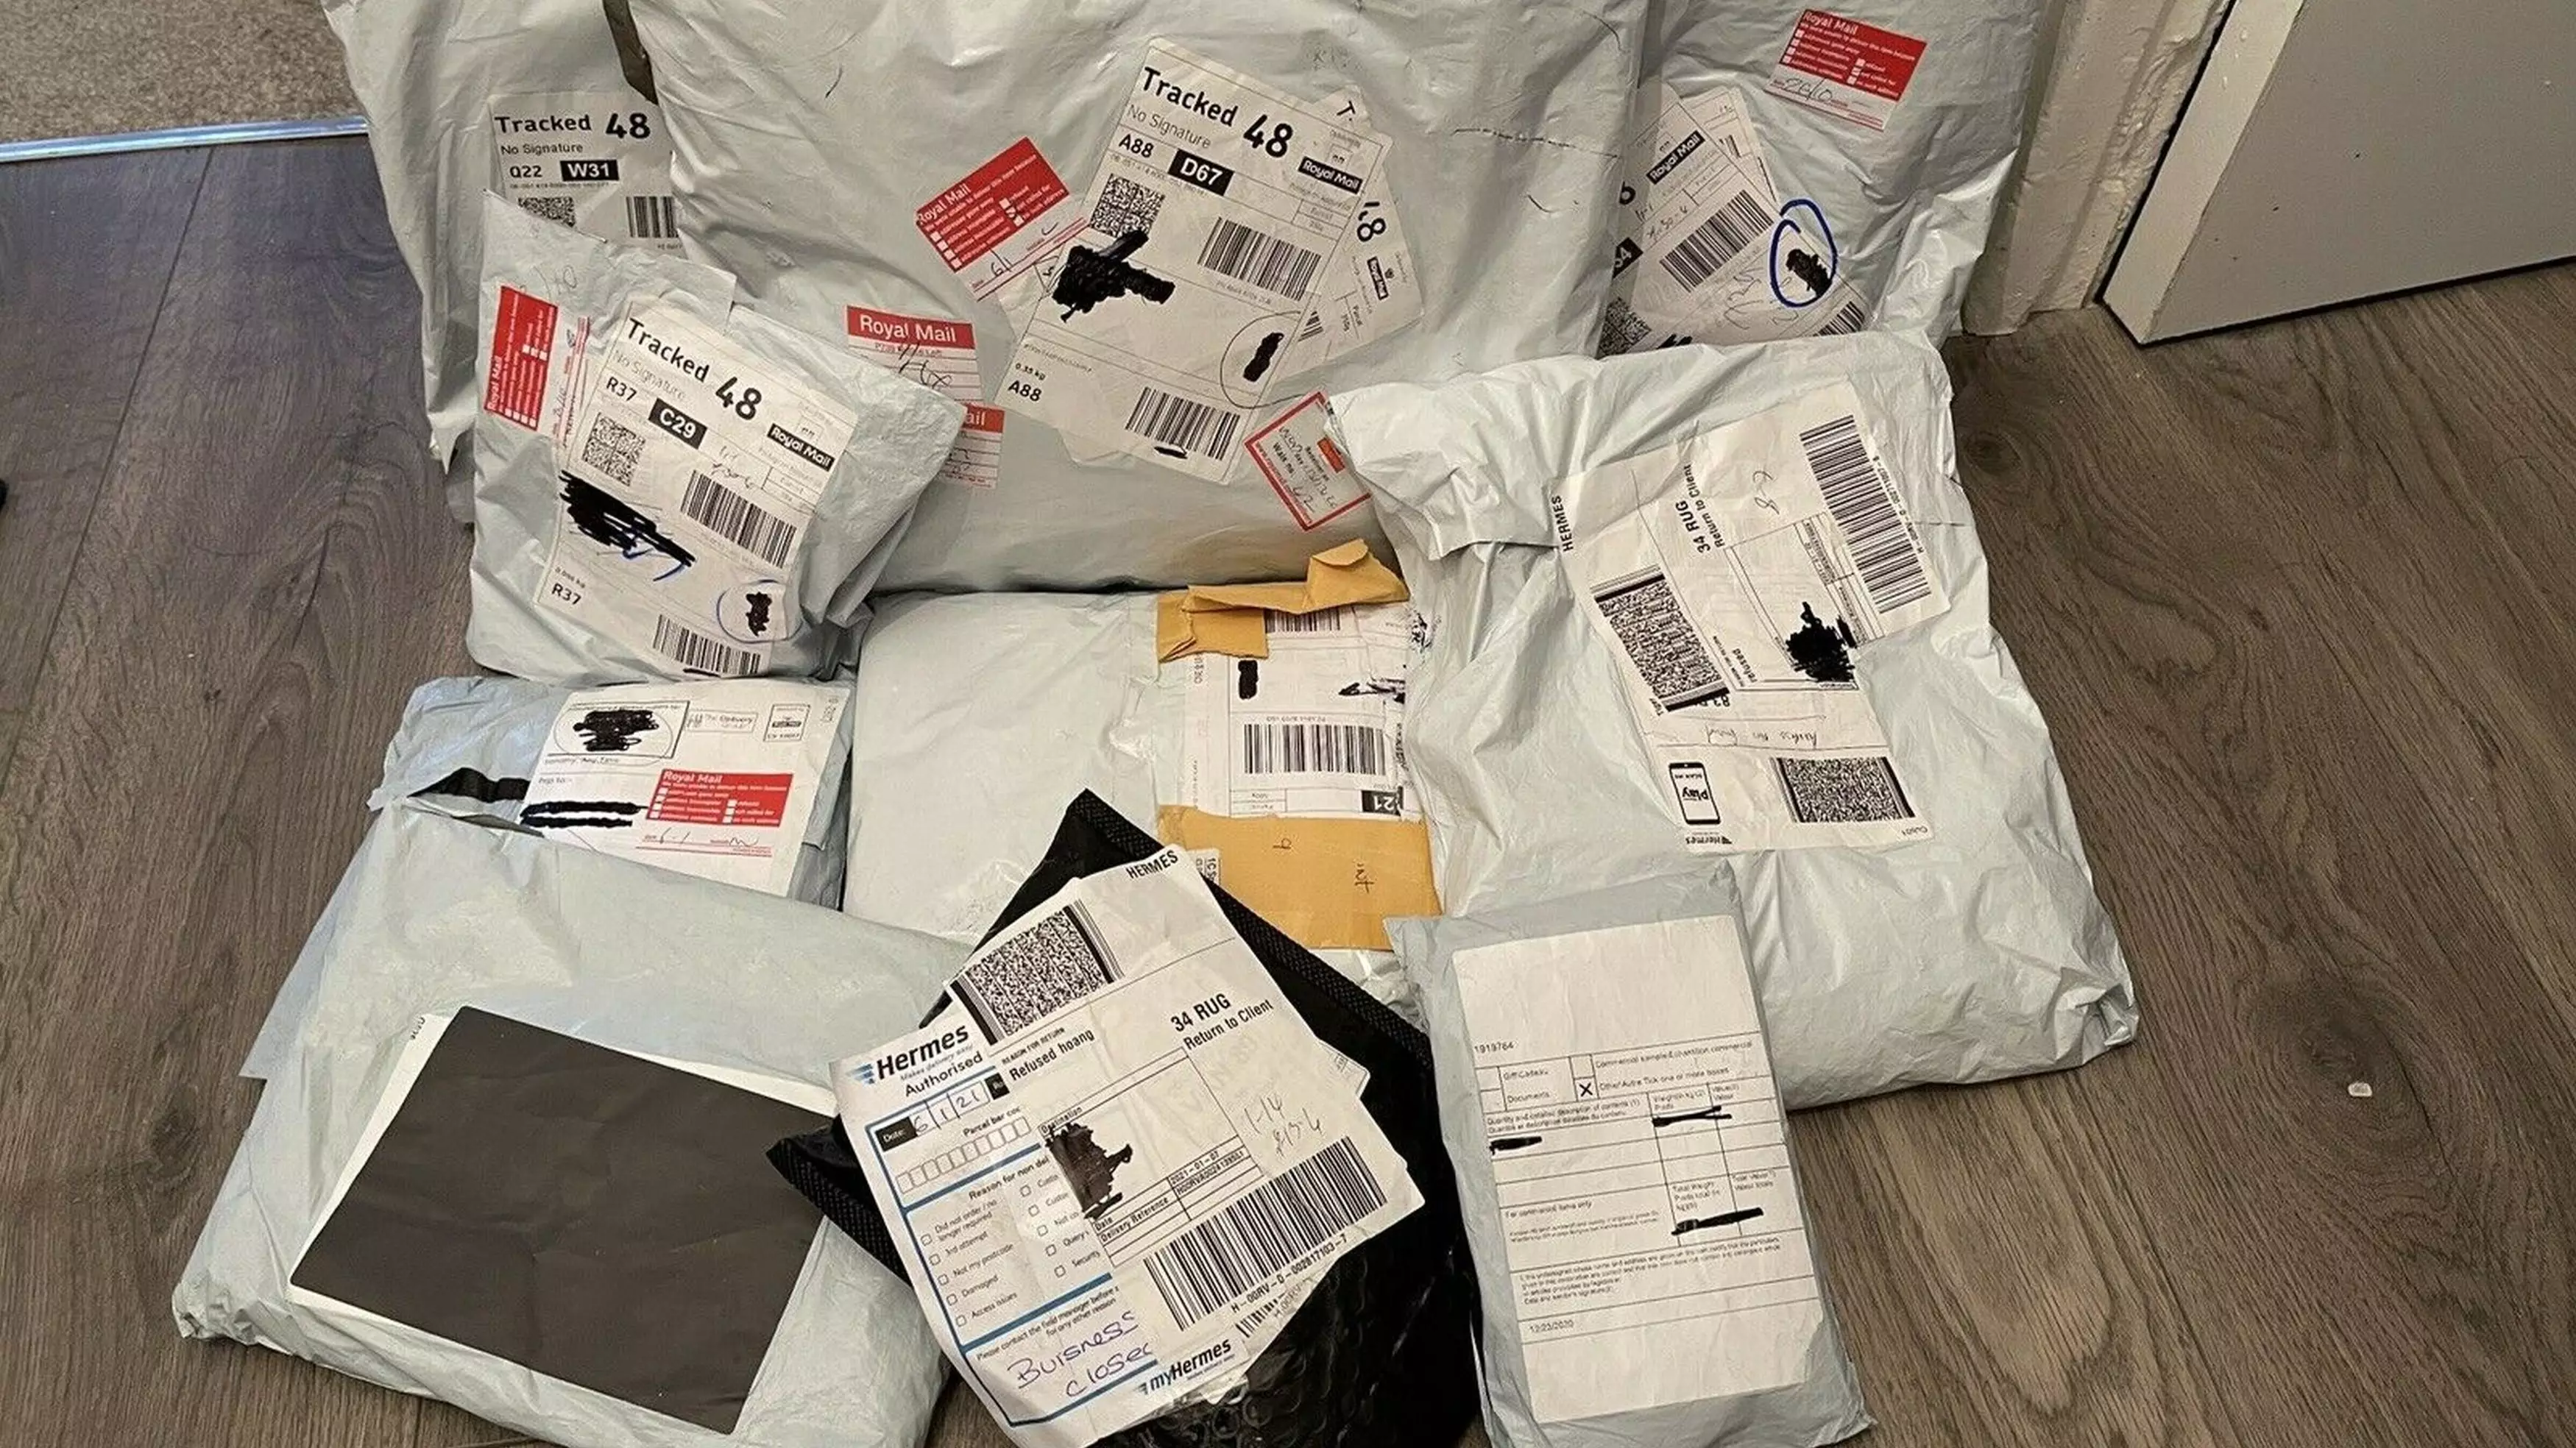 'Lost' Royal Mail And Hermes Parcels Are Being Flogged On eBay For Hundreds Of Pounds